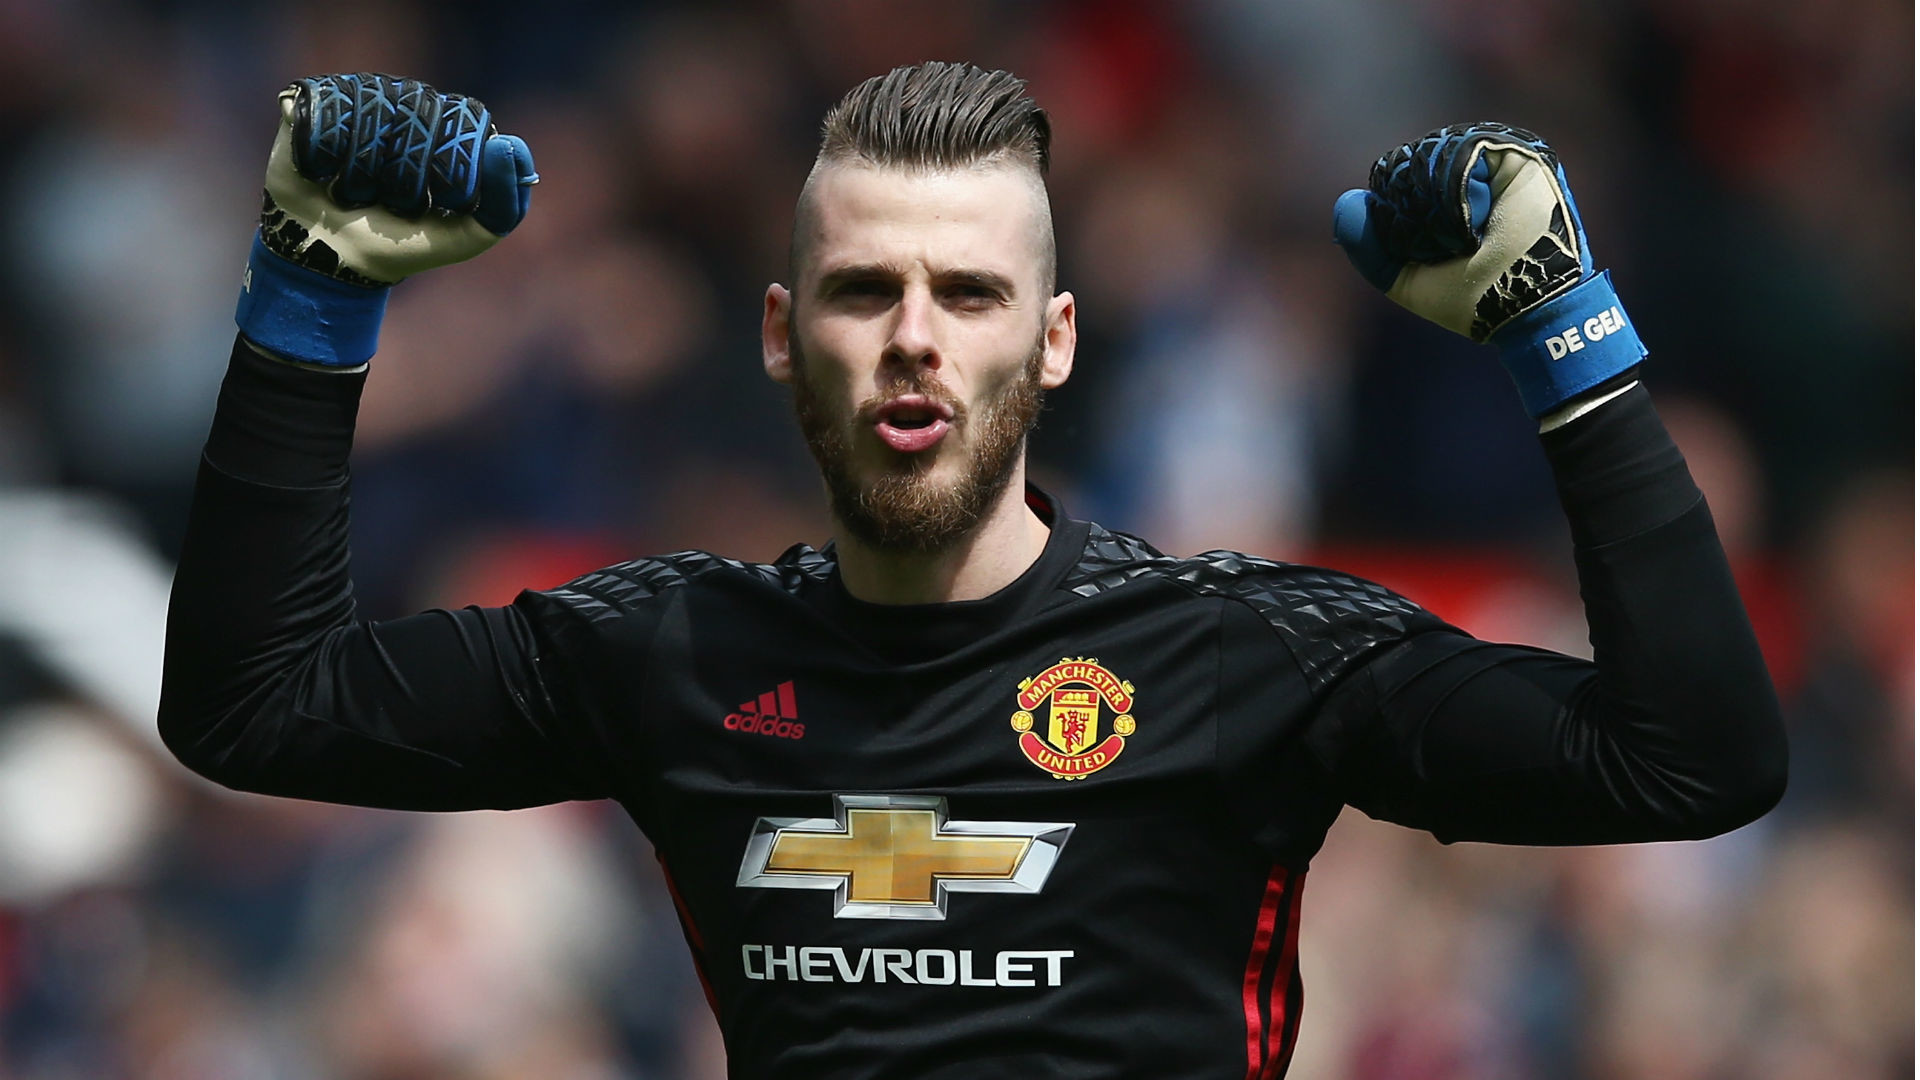 1920x1080 For the first time in four years the 2016-17 season ended with someone  other than De Gea being named Manchester United's player of the season, ...